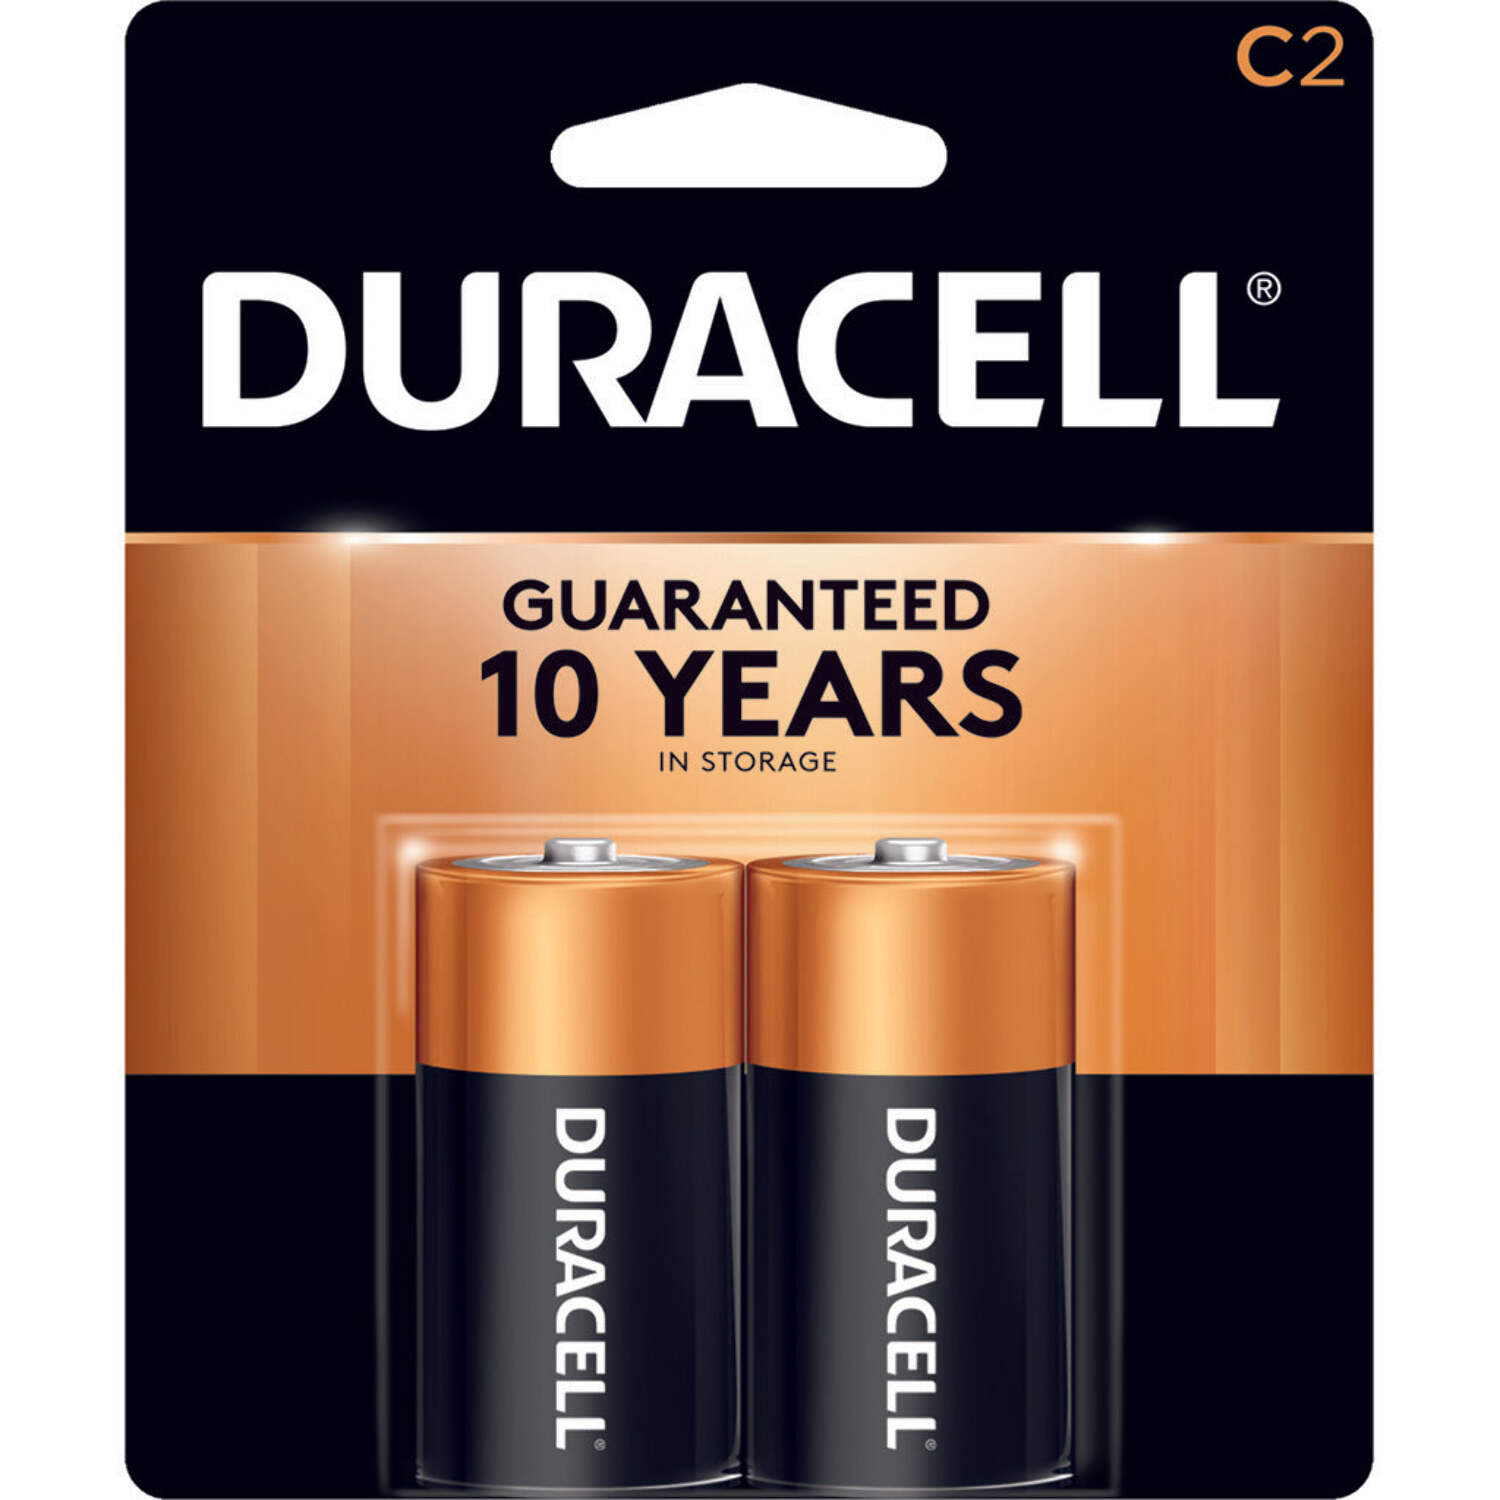 Duracell MN1400B2Z CopperTop Alkaline C Batteries (2/Pack) - image 1 of 5